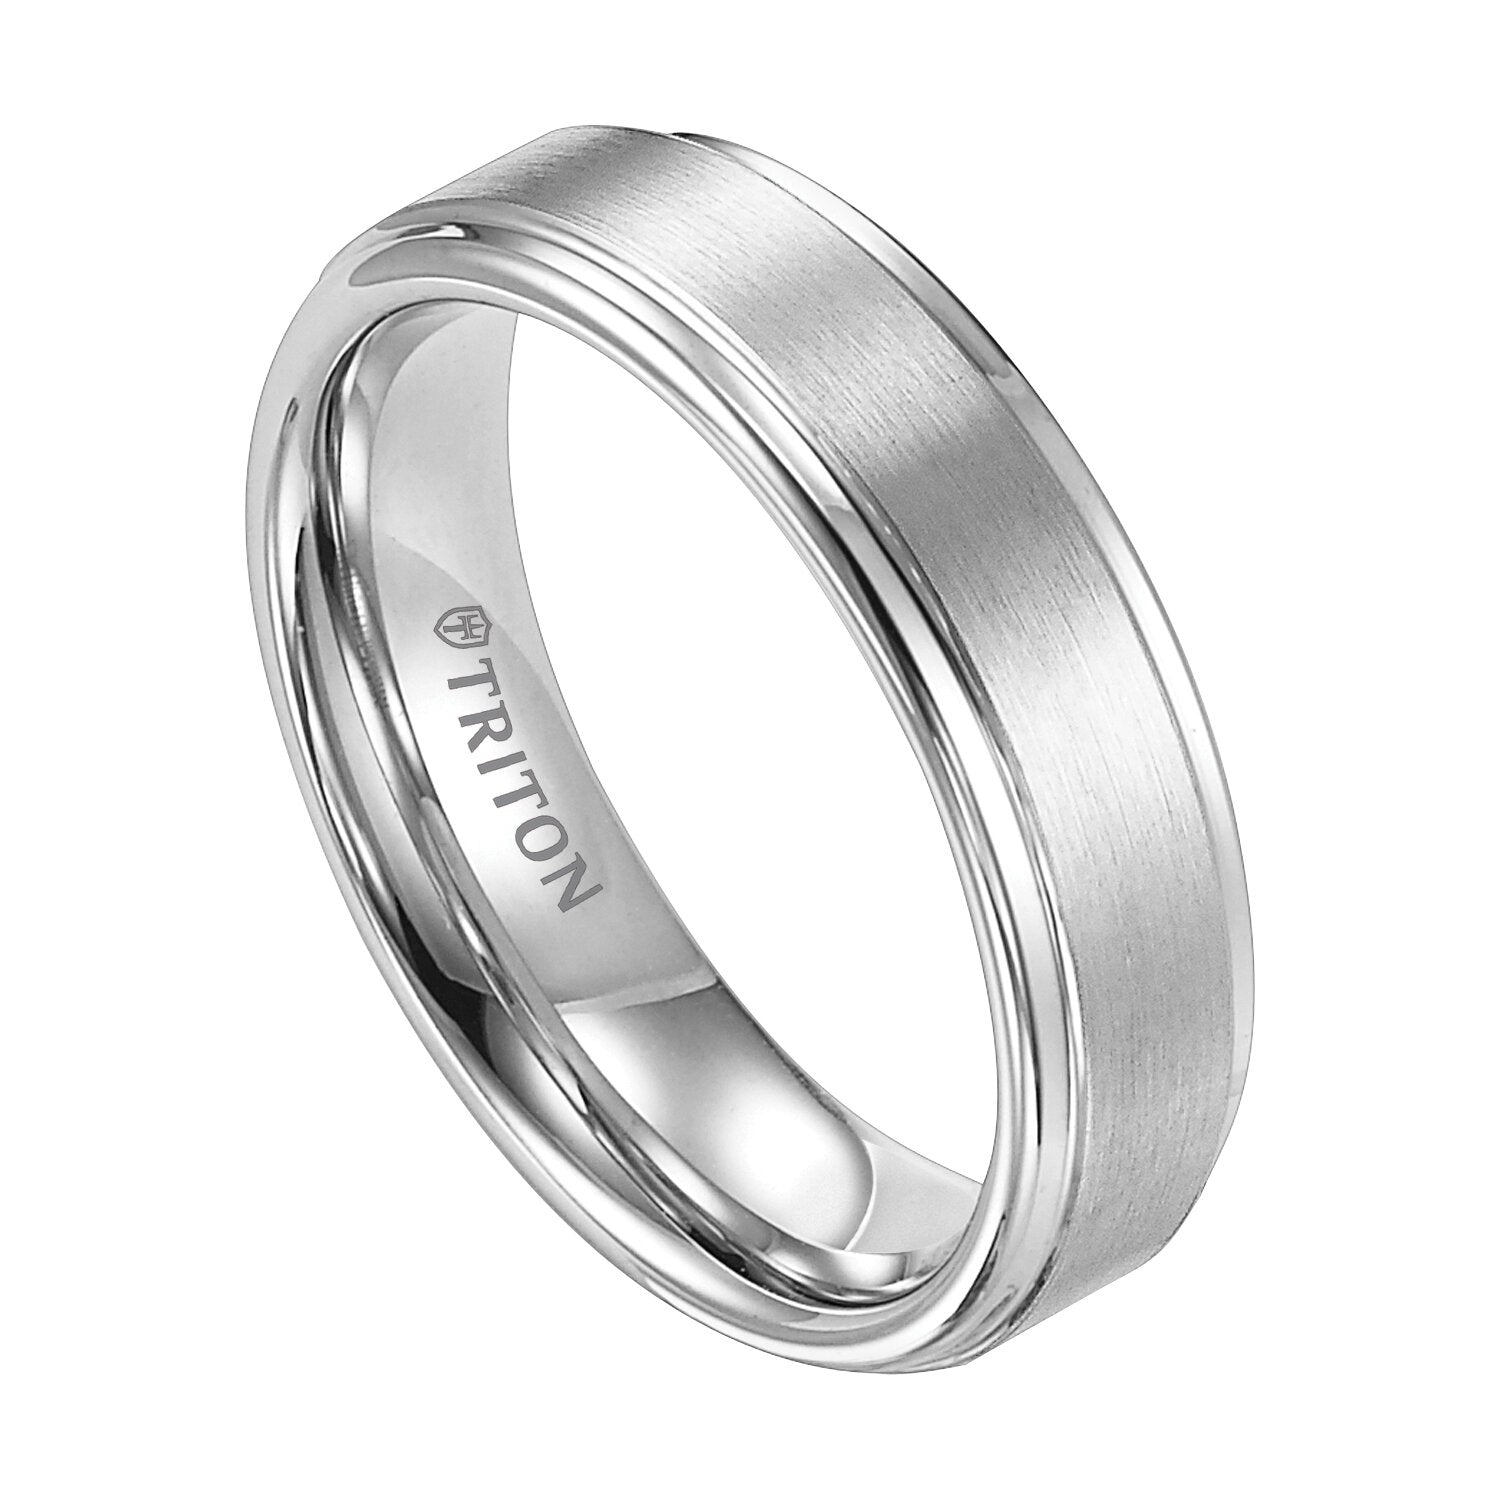 6MM White Tungsten Carbide Ring - Satin Finish Center and Step Edge